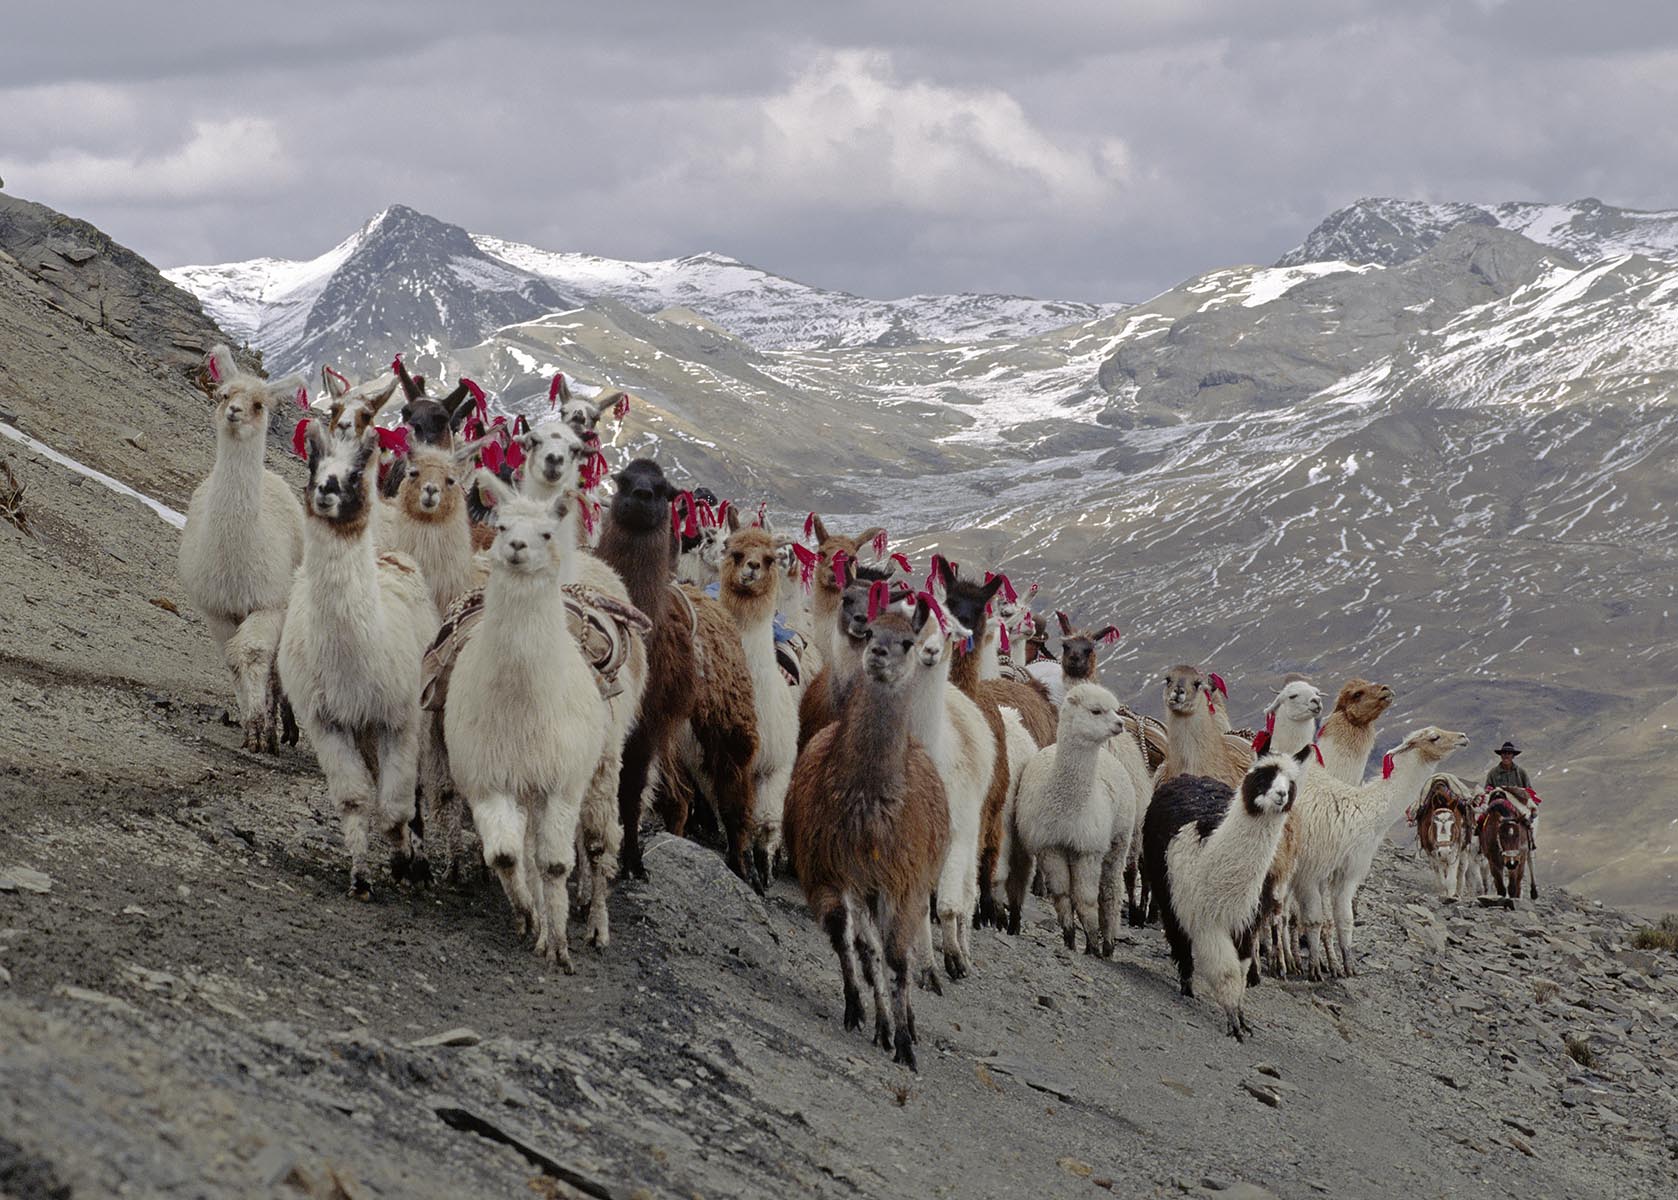 A herd of LLAMAS on the trail below ARAPA PASS on AUZANGATE'S west flank - PERUVIAN ANDES